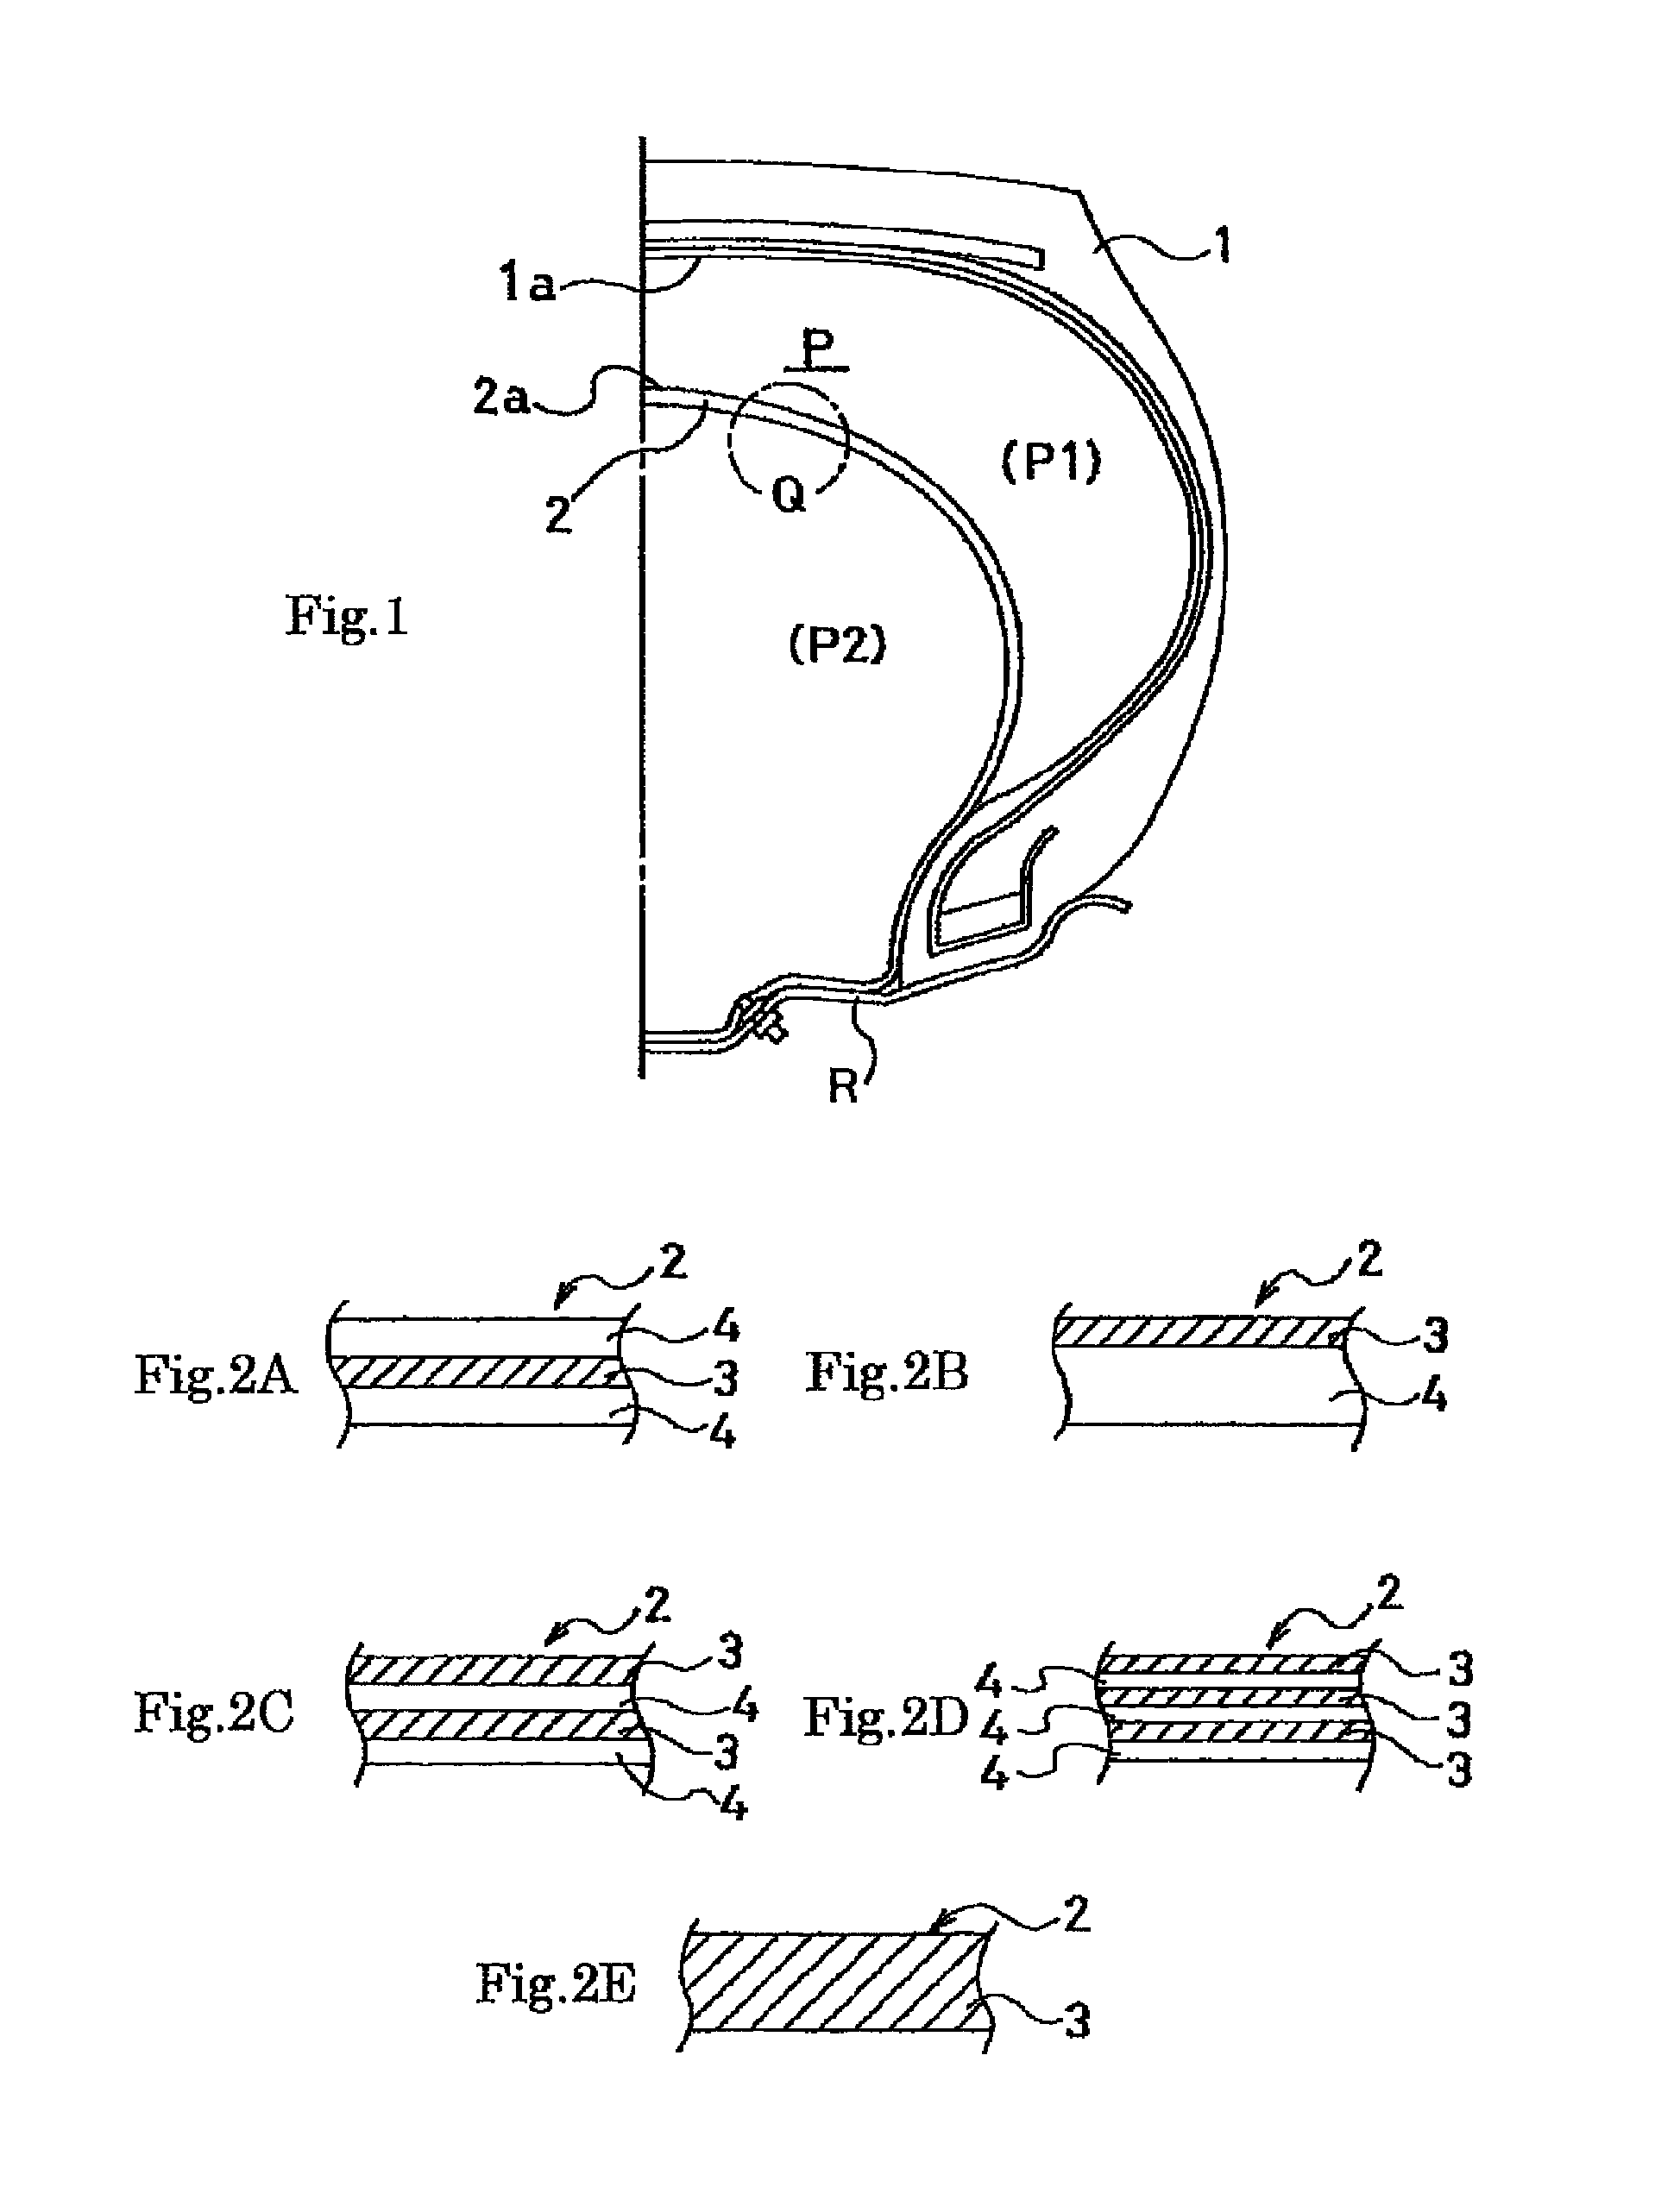 Pneumatic tire/rim assembly